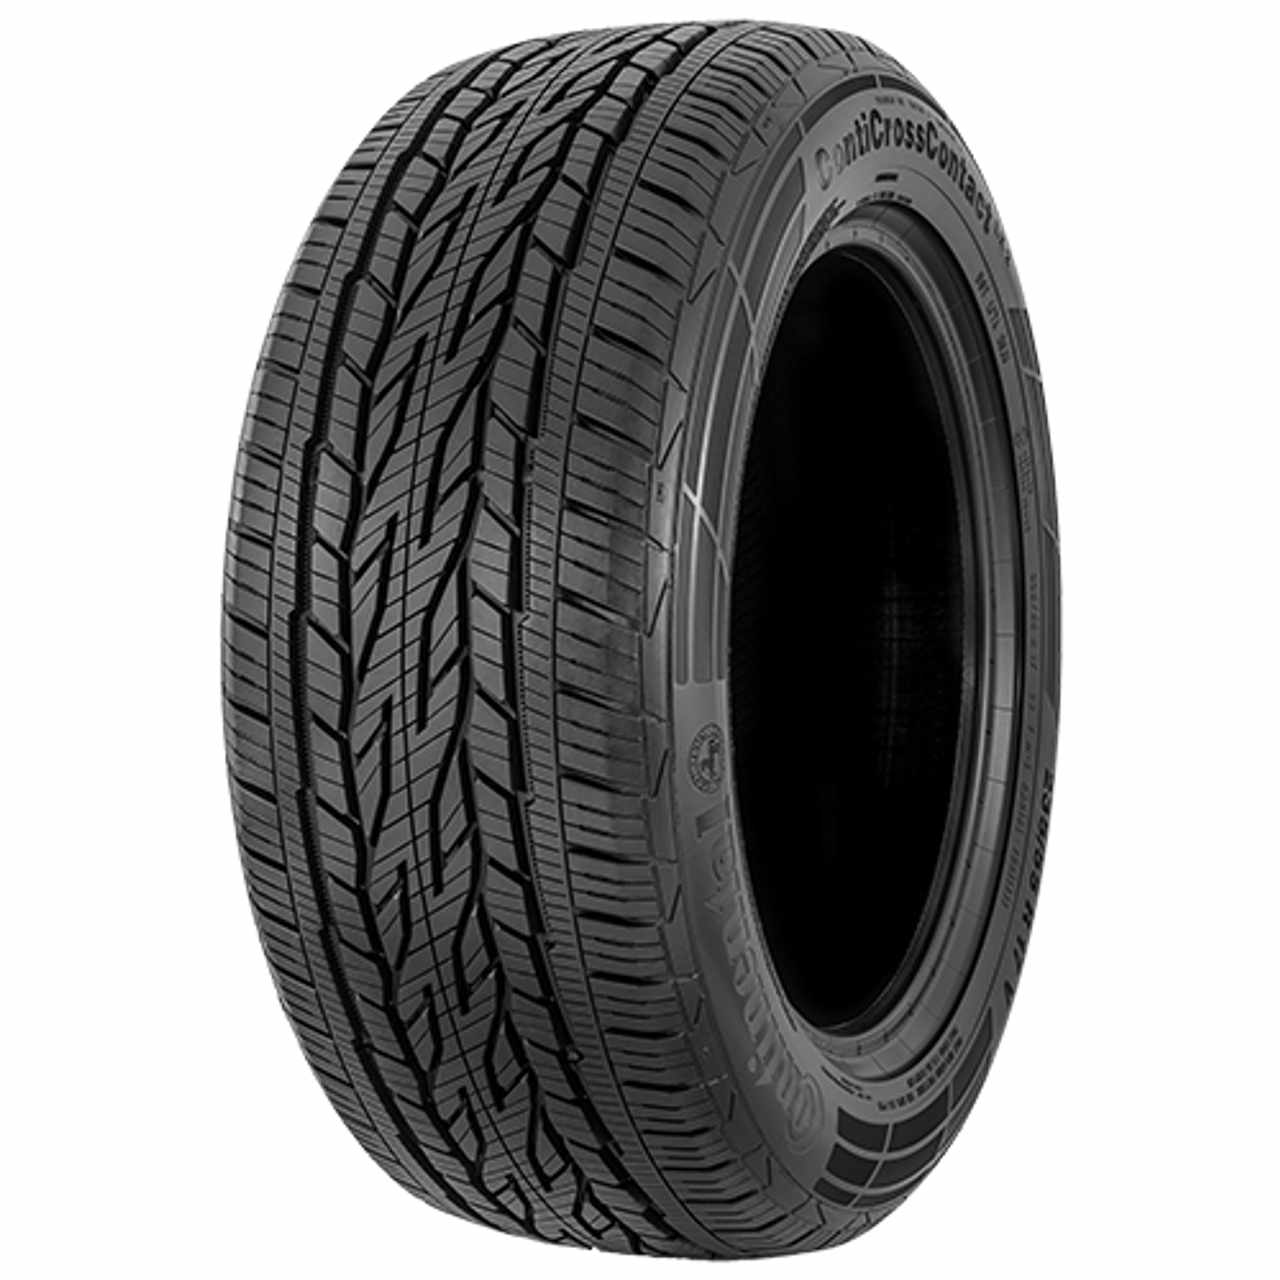 CONTINENTAL CONTICROSSCONTACT LX 2 (EVc) 215/60R16 95H FR BSW